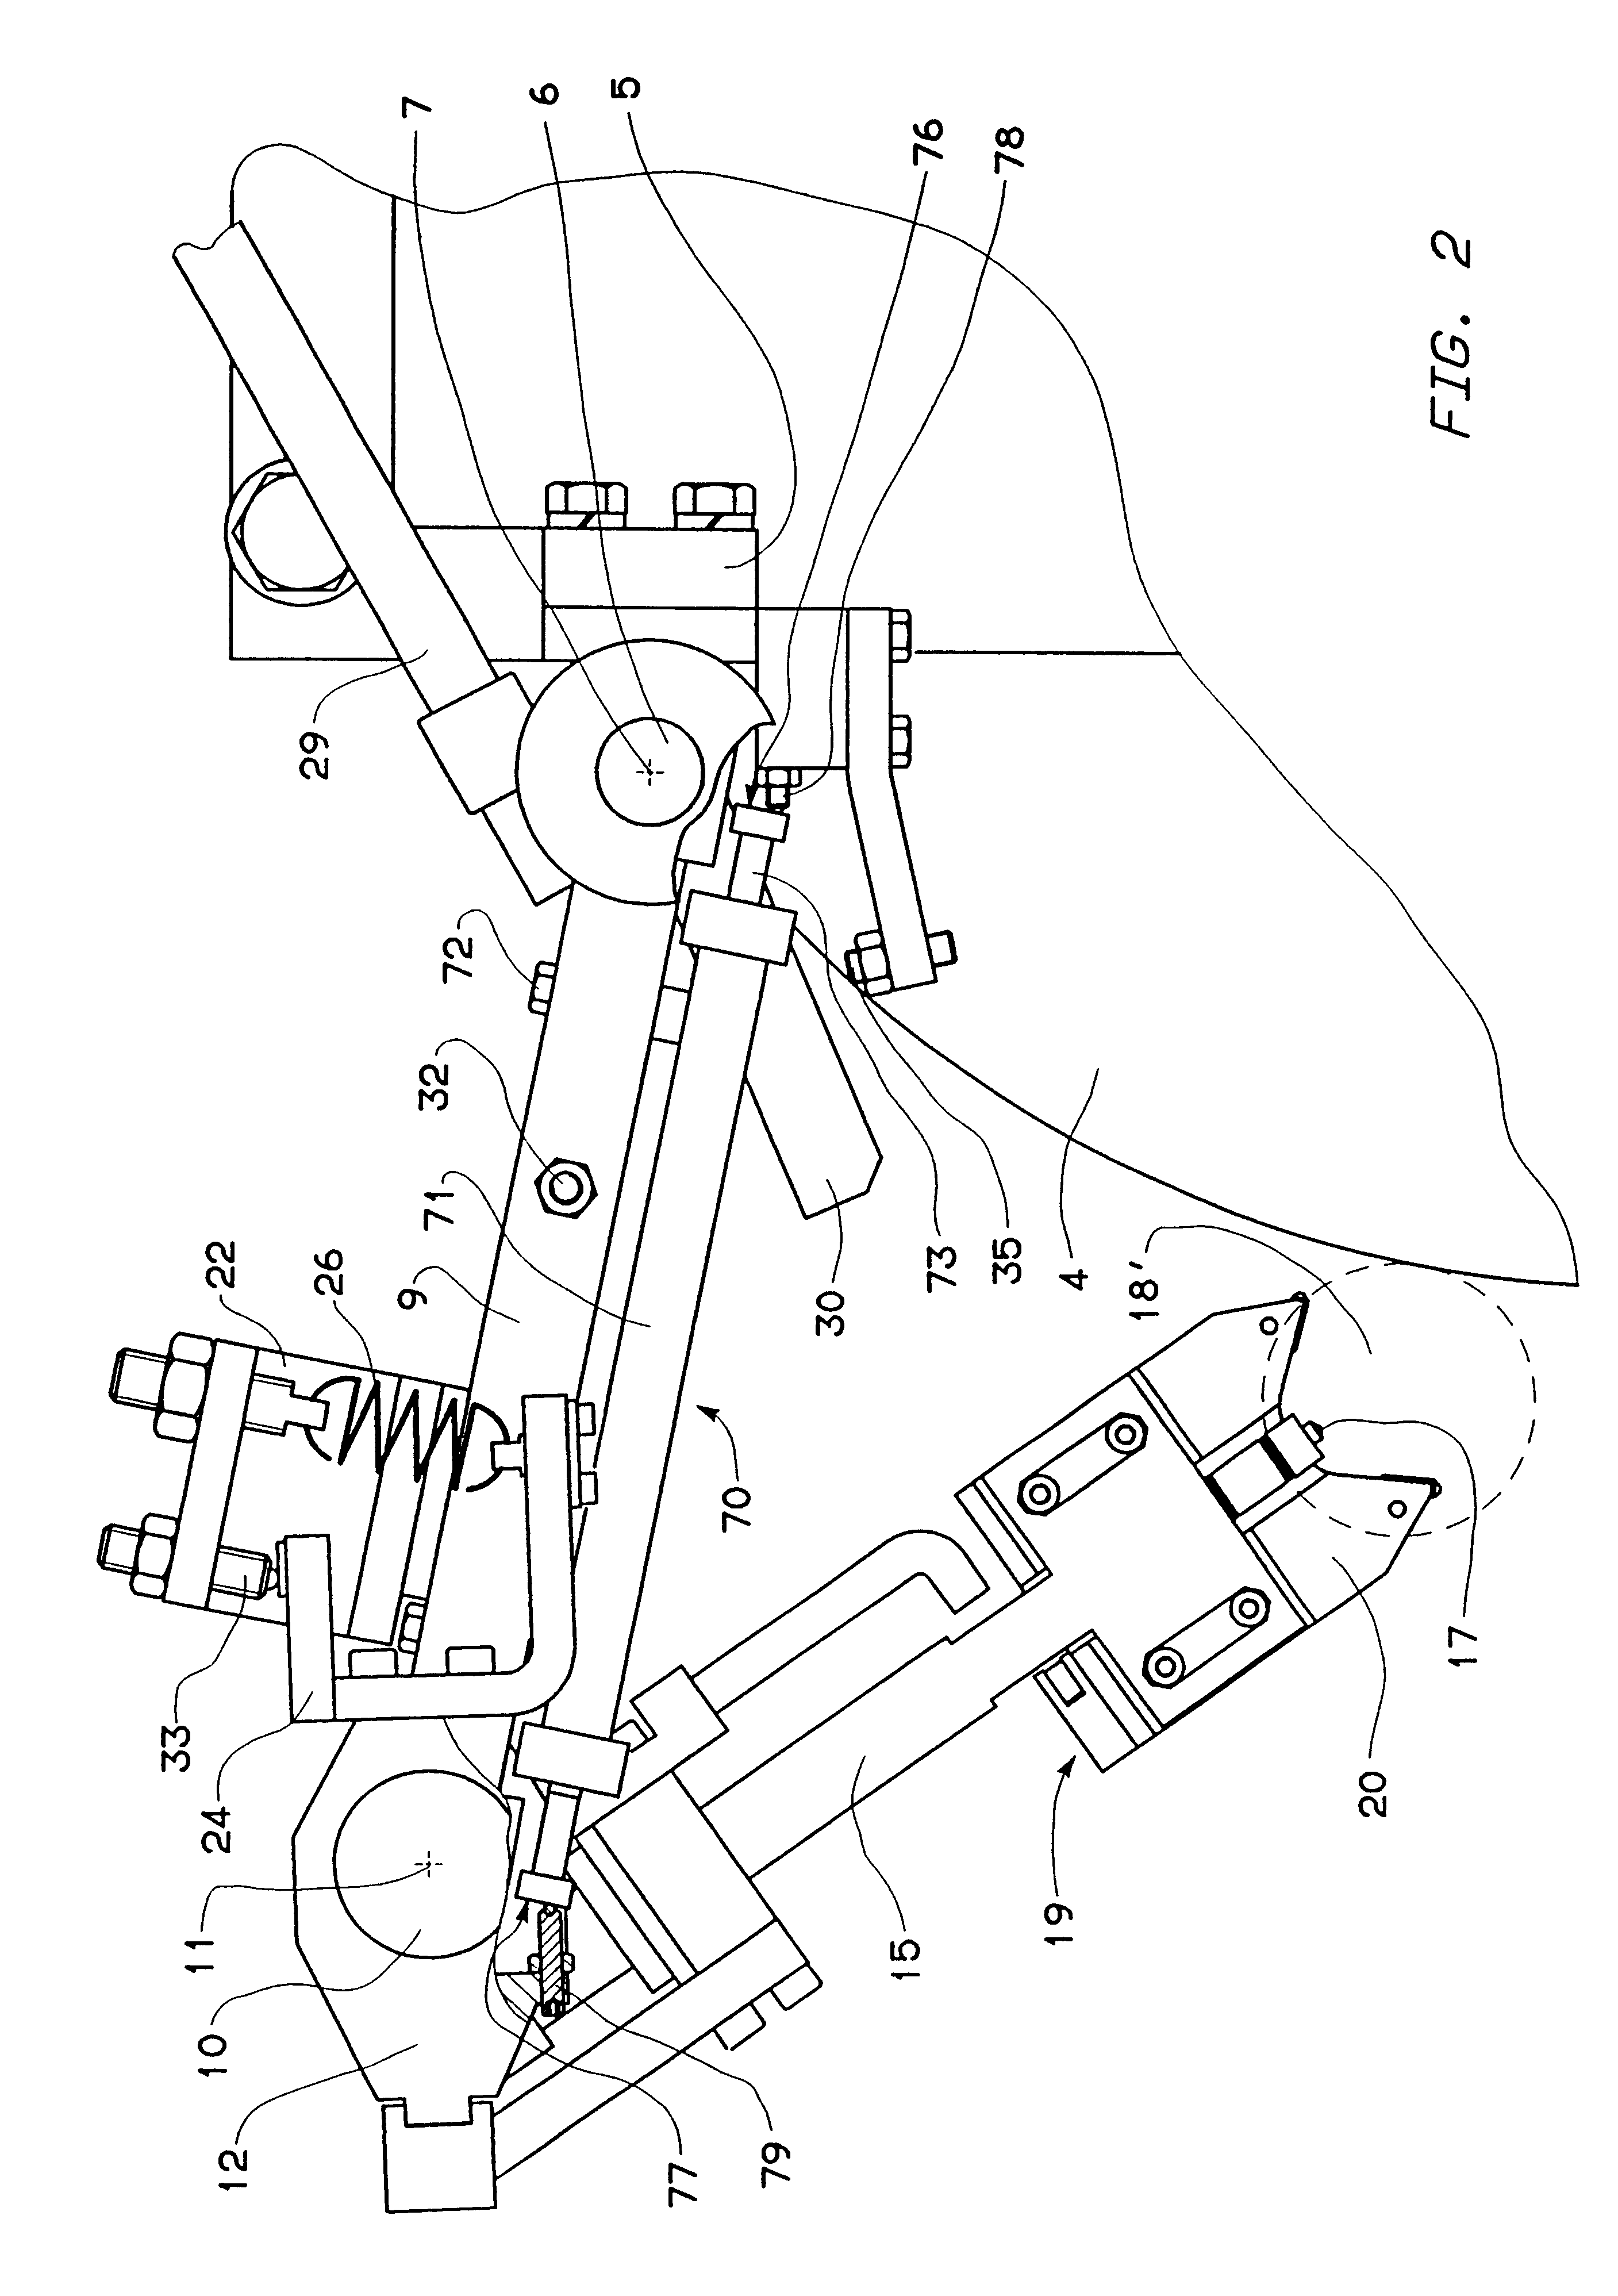 Apparatus for the in-process dimensional checking of orbitally rotating crankpins